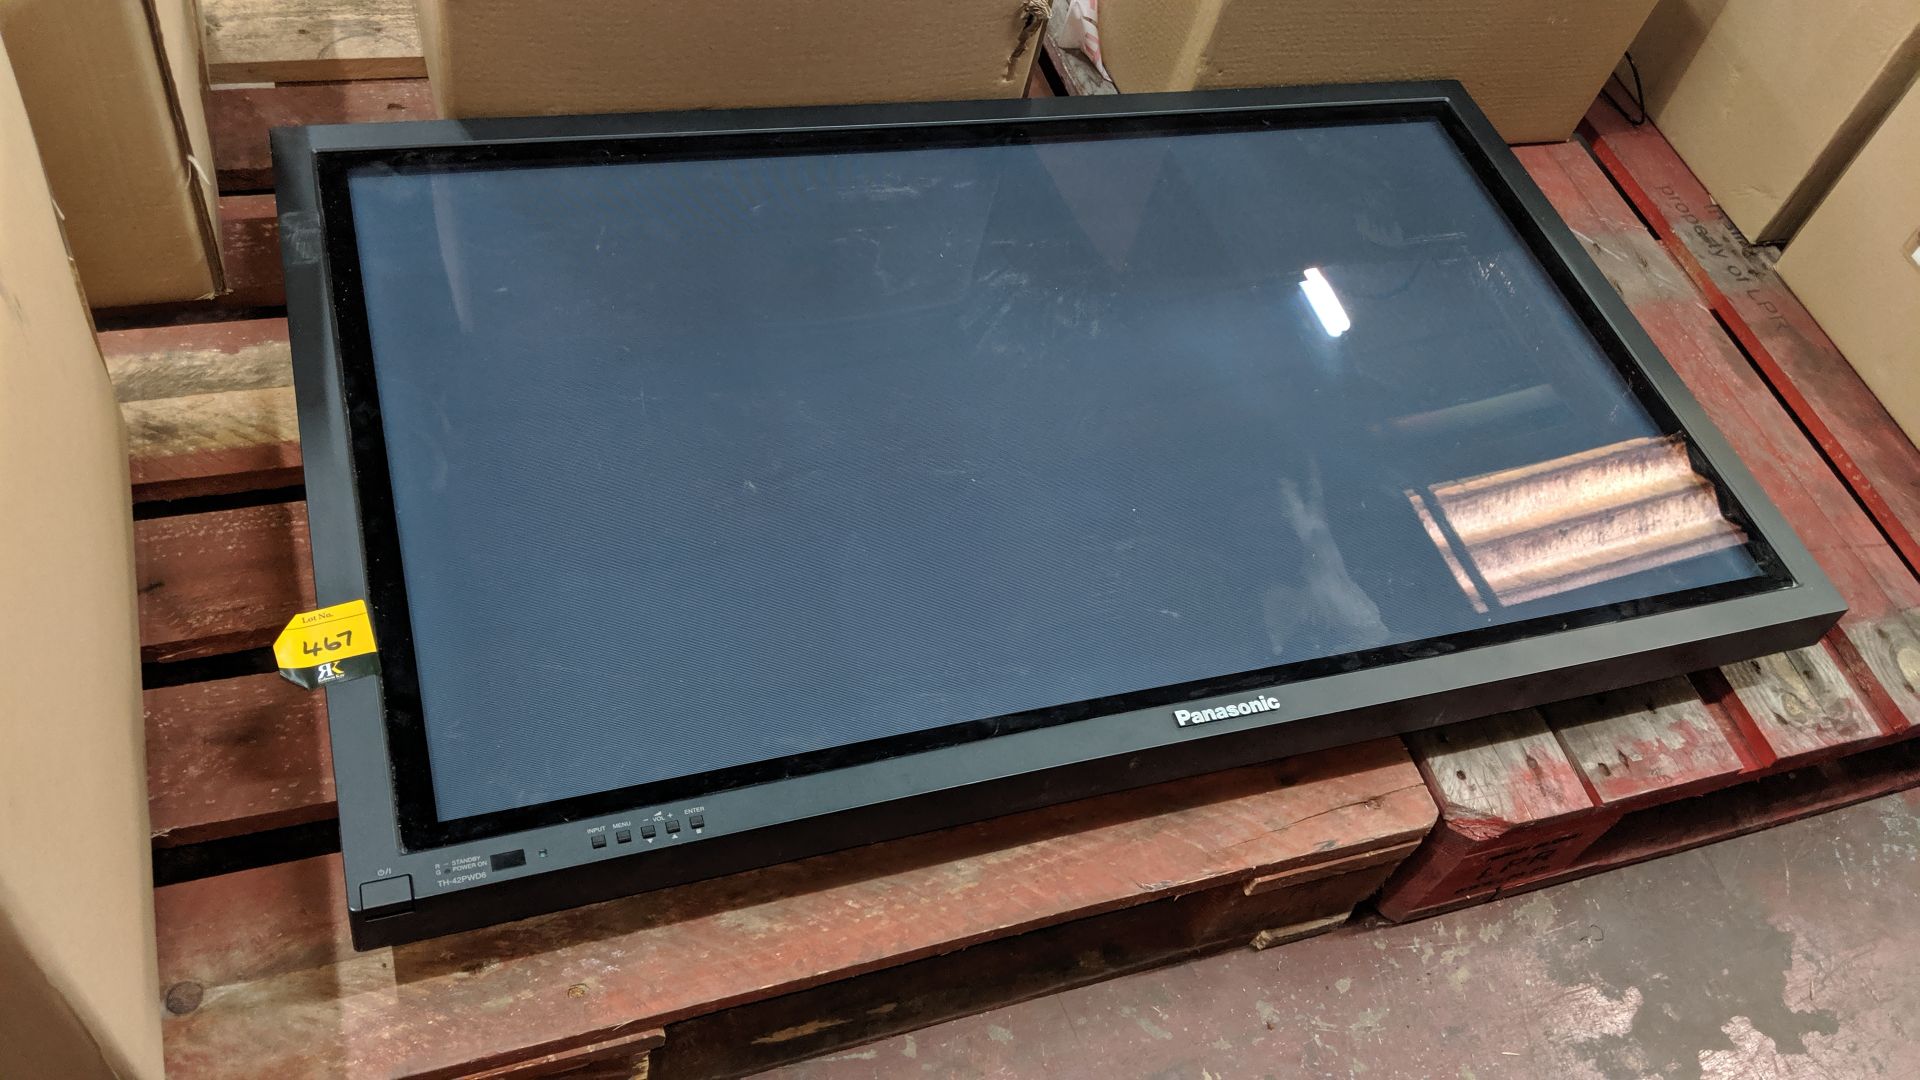 Panasonic 42" plasma TV model TH-42PWD6. This is one of a large number of lots being sold on